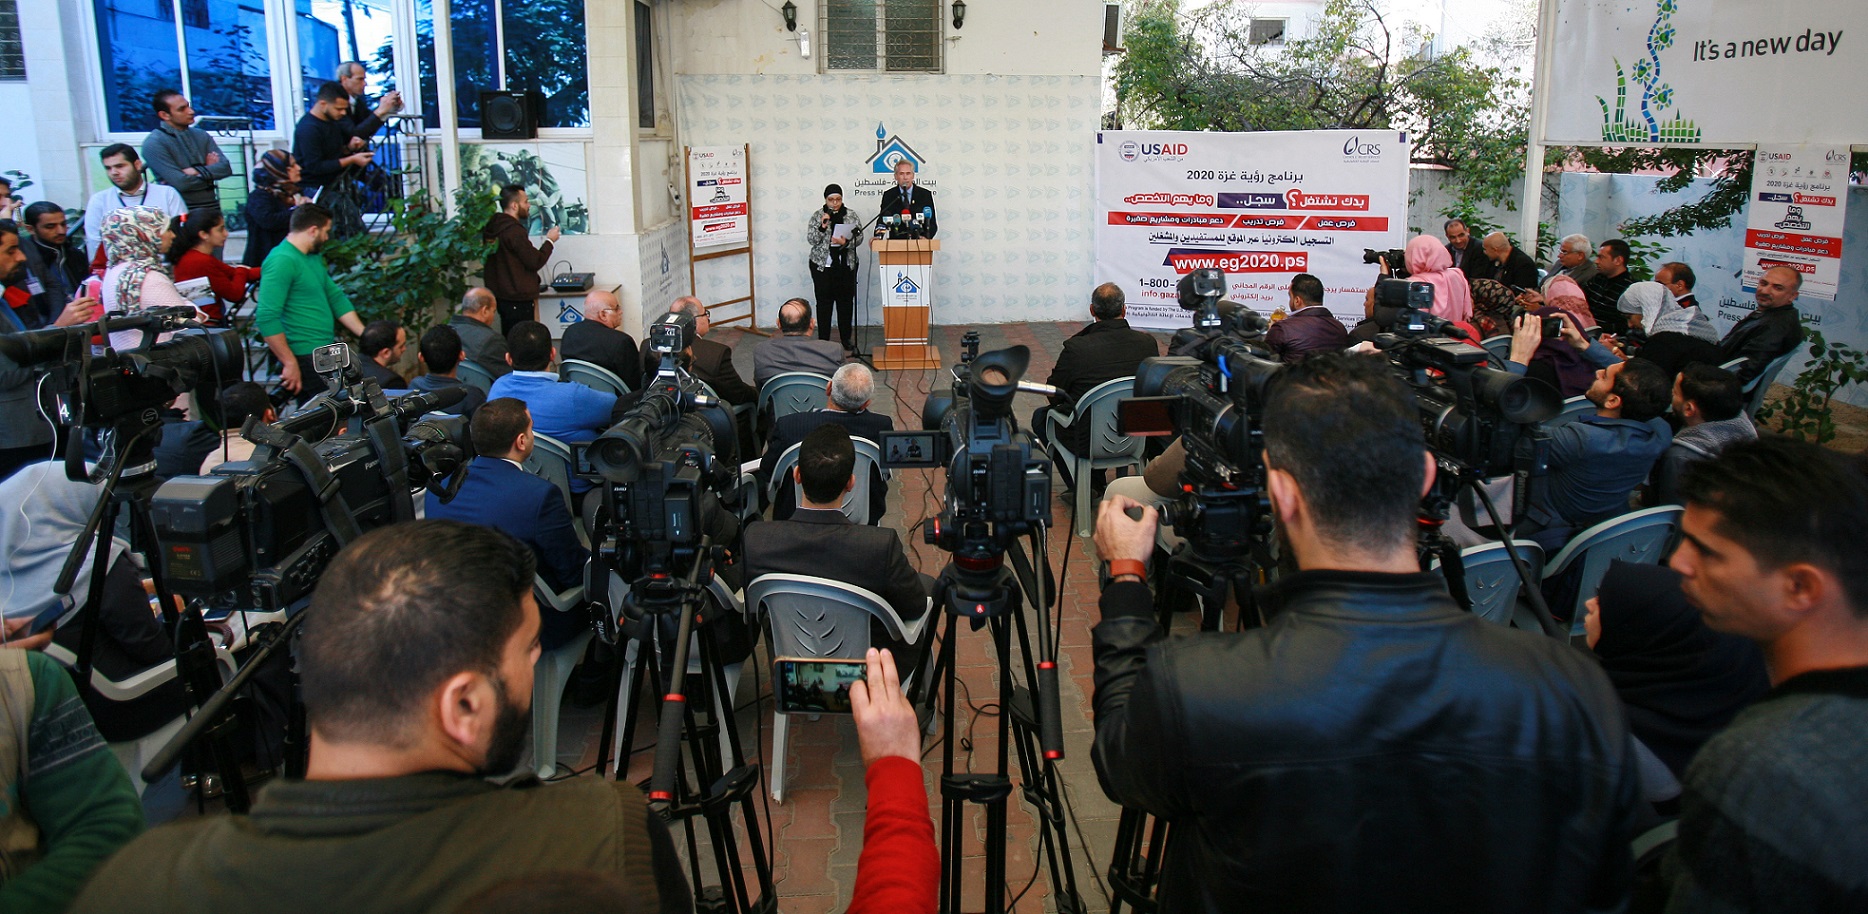 Gaza Envision 2020 Program For Jobs is Launched in Press House